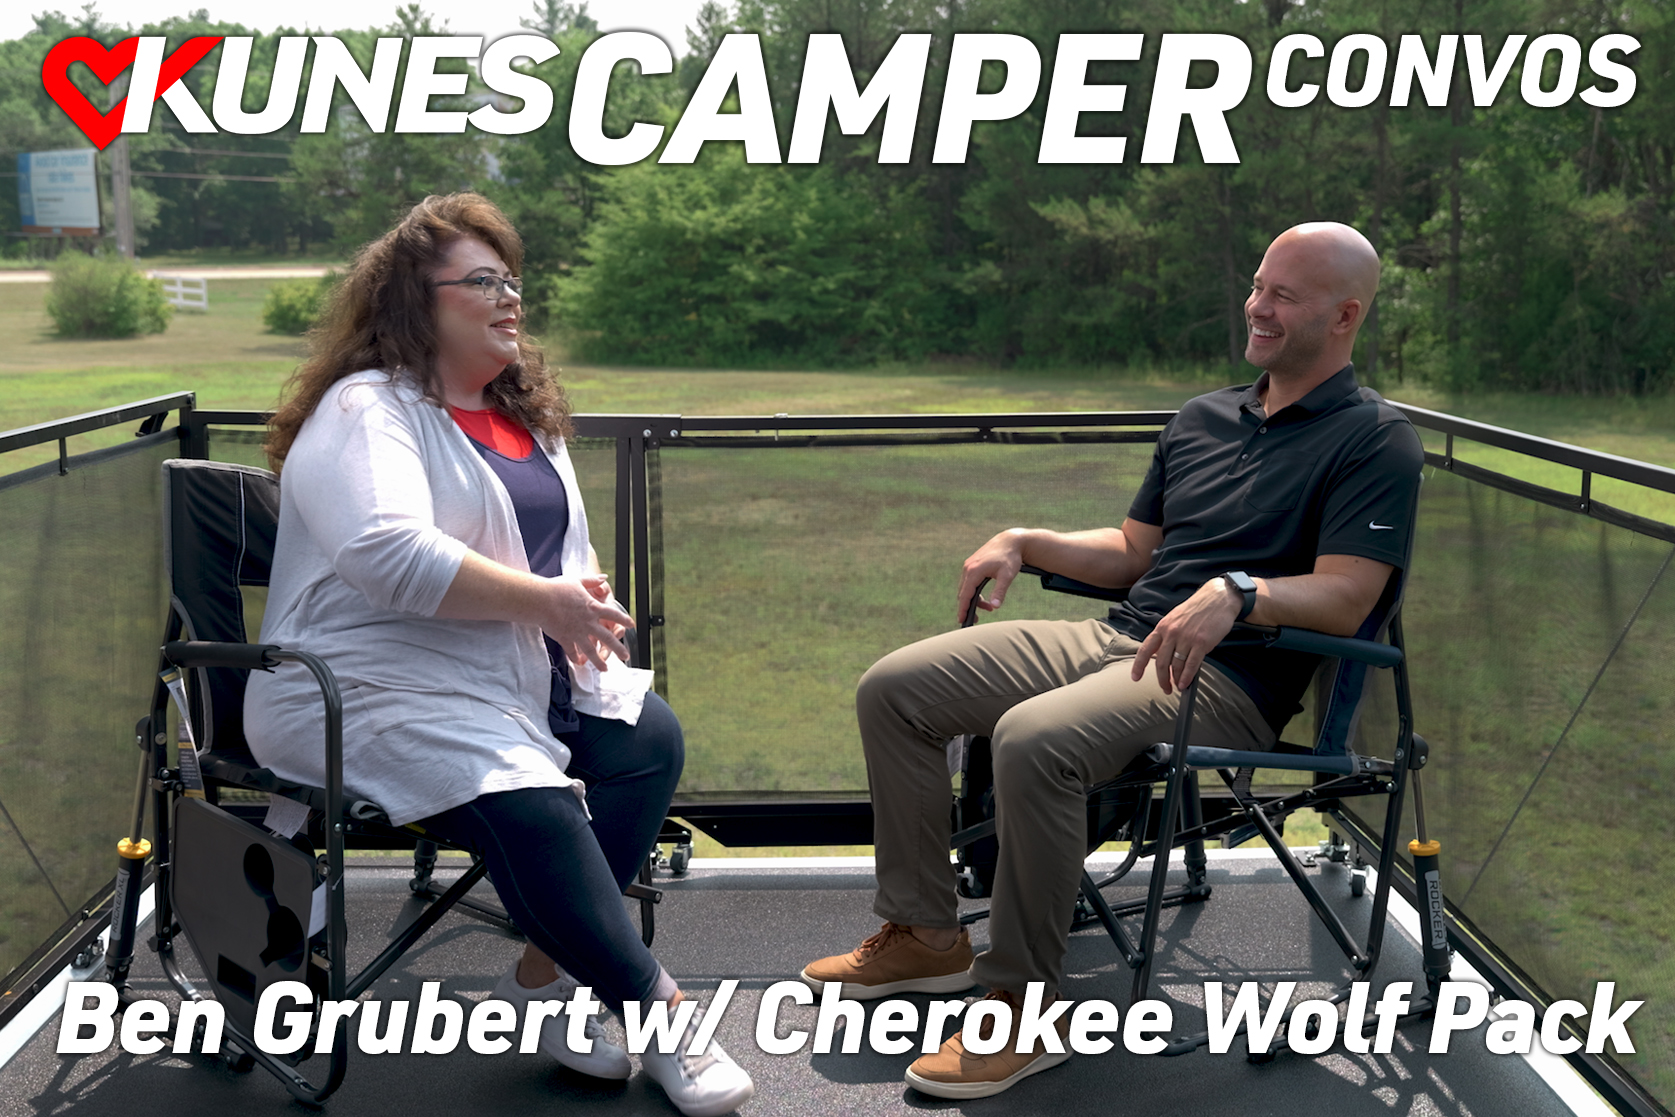 Lisa Rosue, Kunes RV marketing manager, and Ben Grubert from Cherokee Wolf Pack, on the back patio of a 2023 Cherokee Wolf Pack 4500PACK14D; Text says: Kunes Camper Convos, Ben Grubert w/Cherokee Wolf Pack